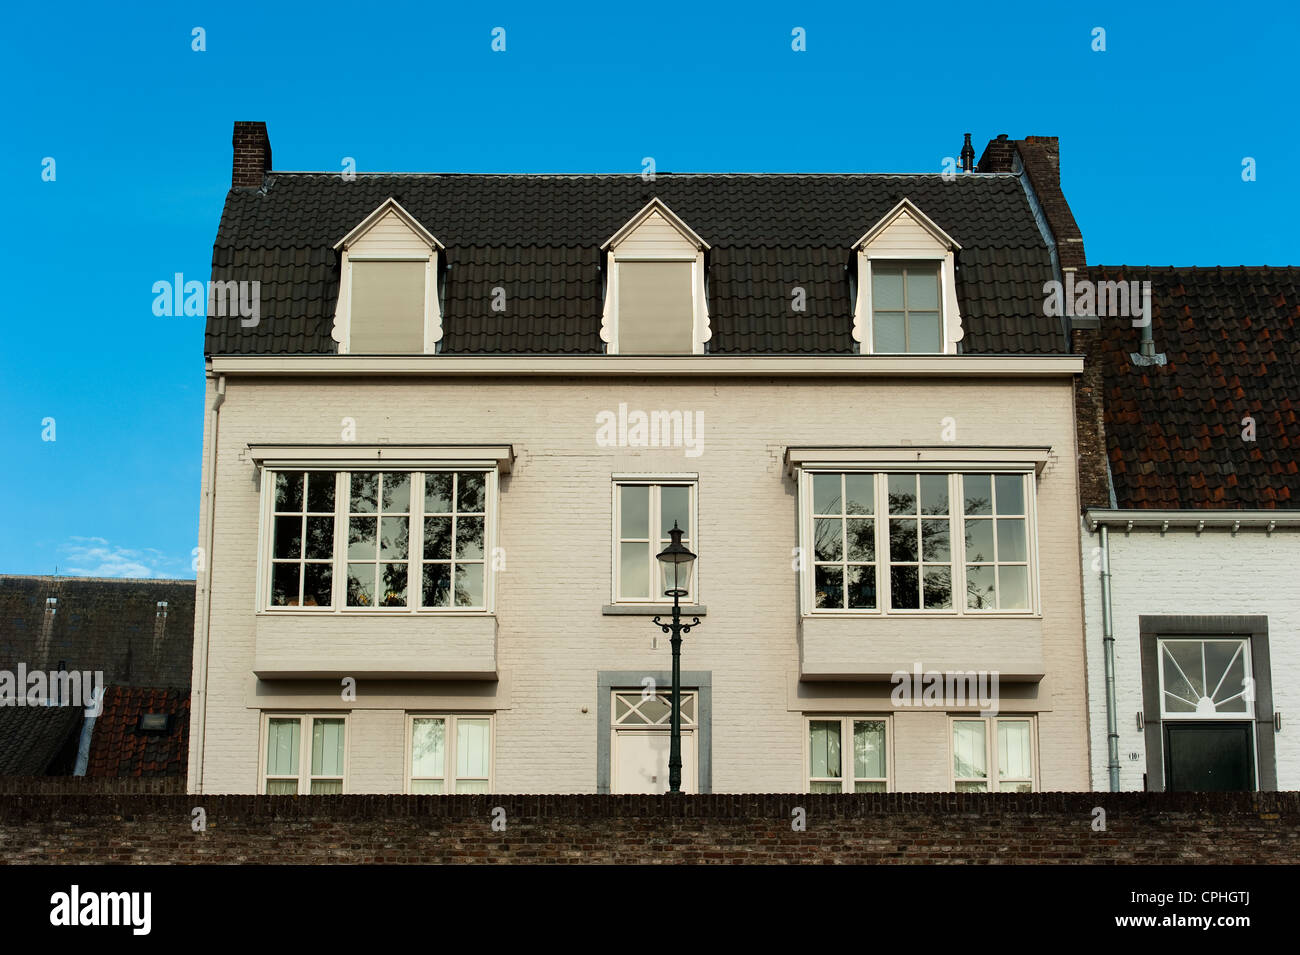 House on top of 'Eerste Middeleeuwse Omwalling' town walls, Maastricht, Limburg, The Netherlands, Europe. Stock Photo